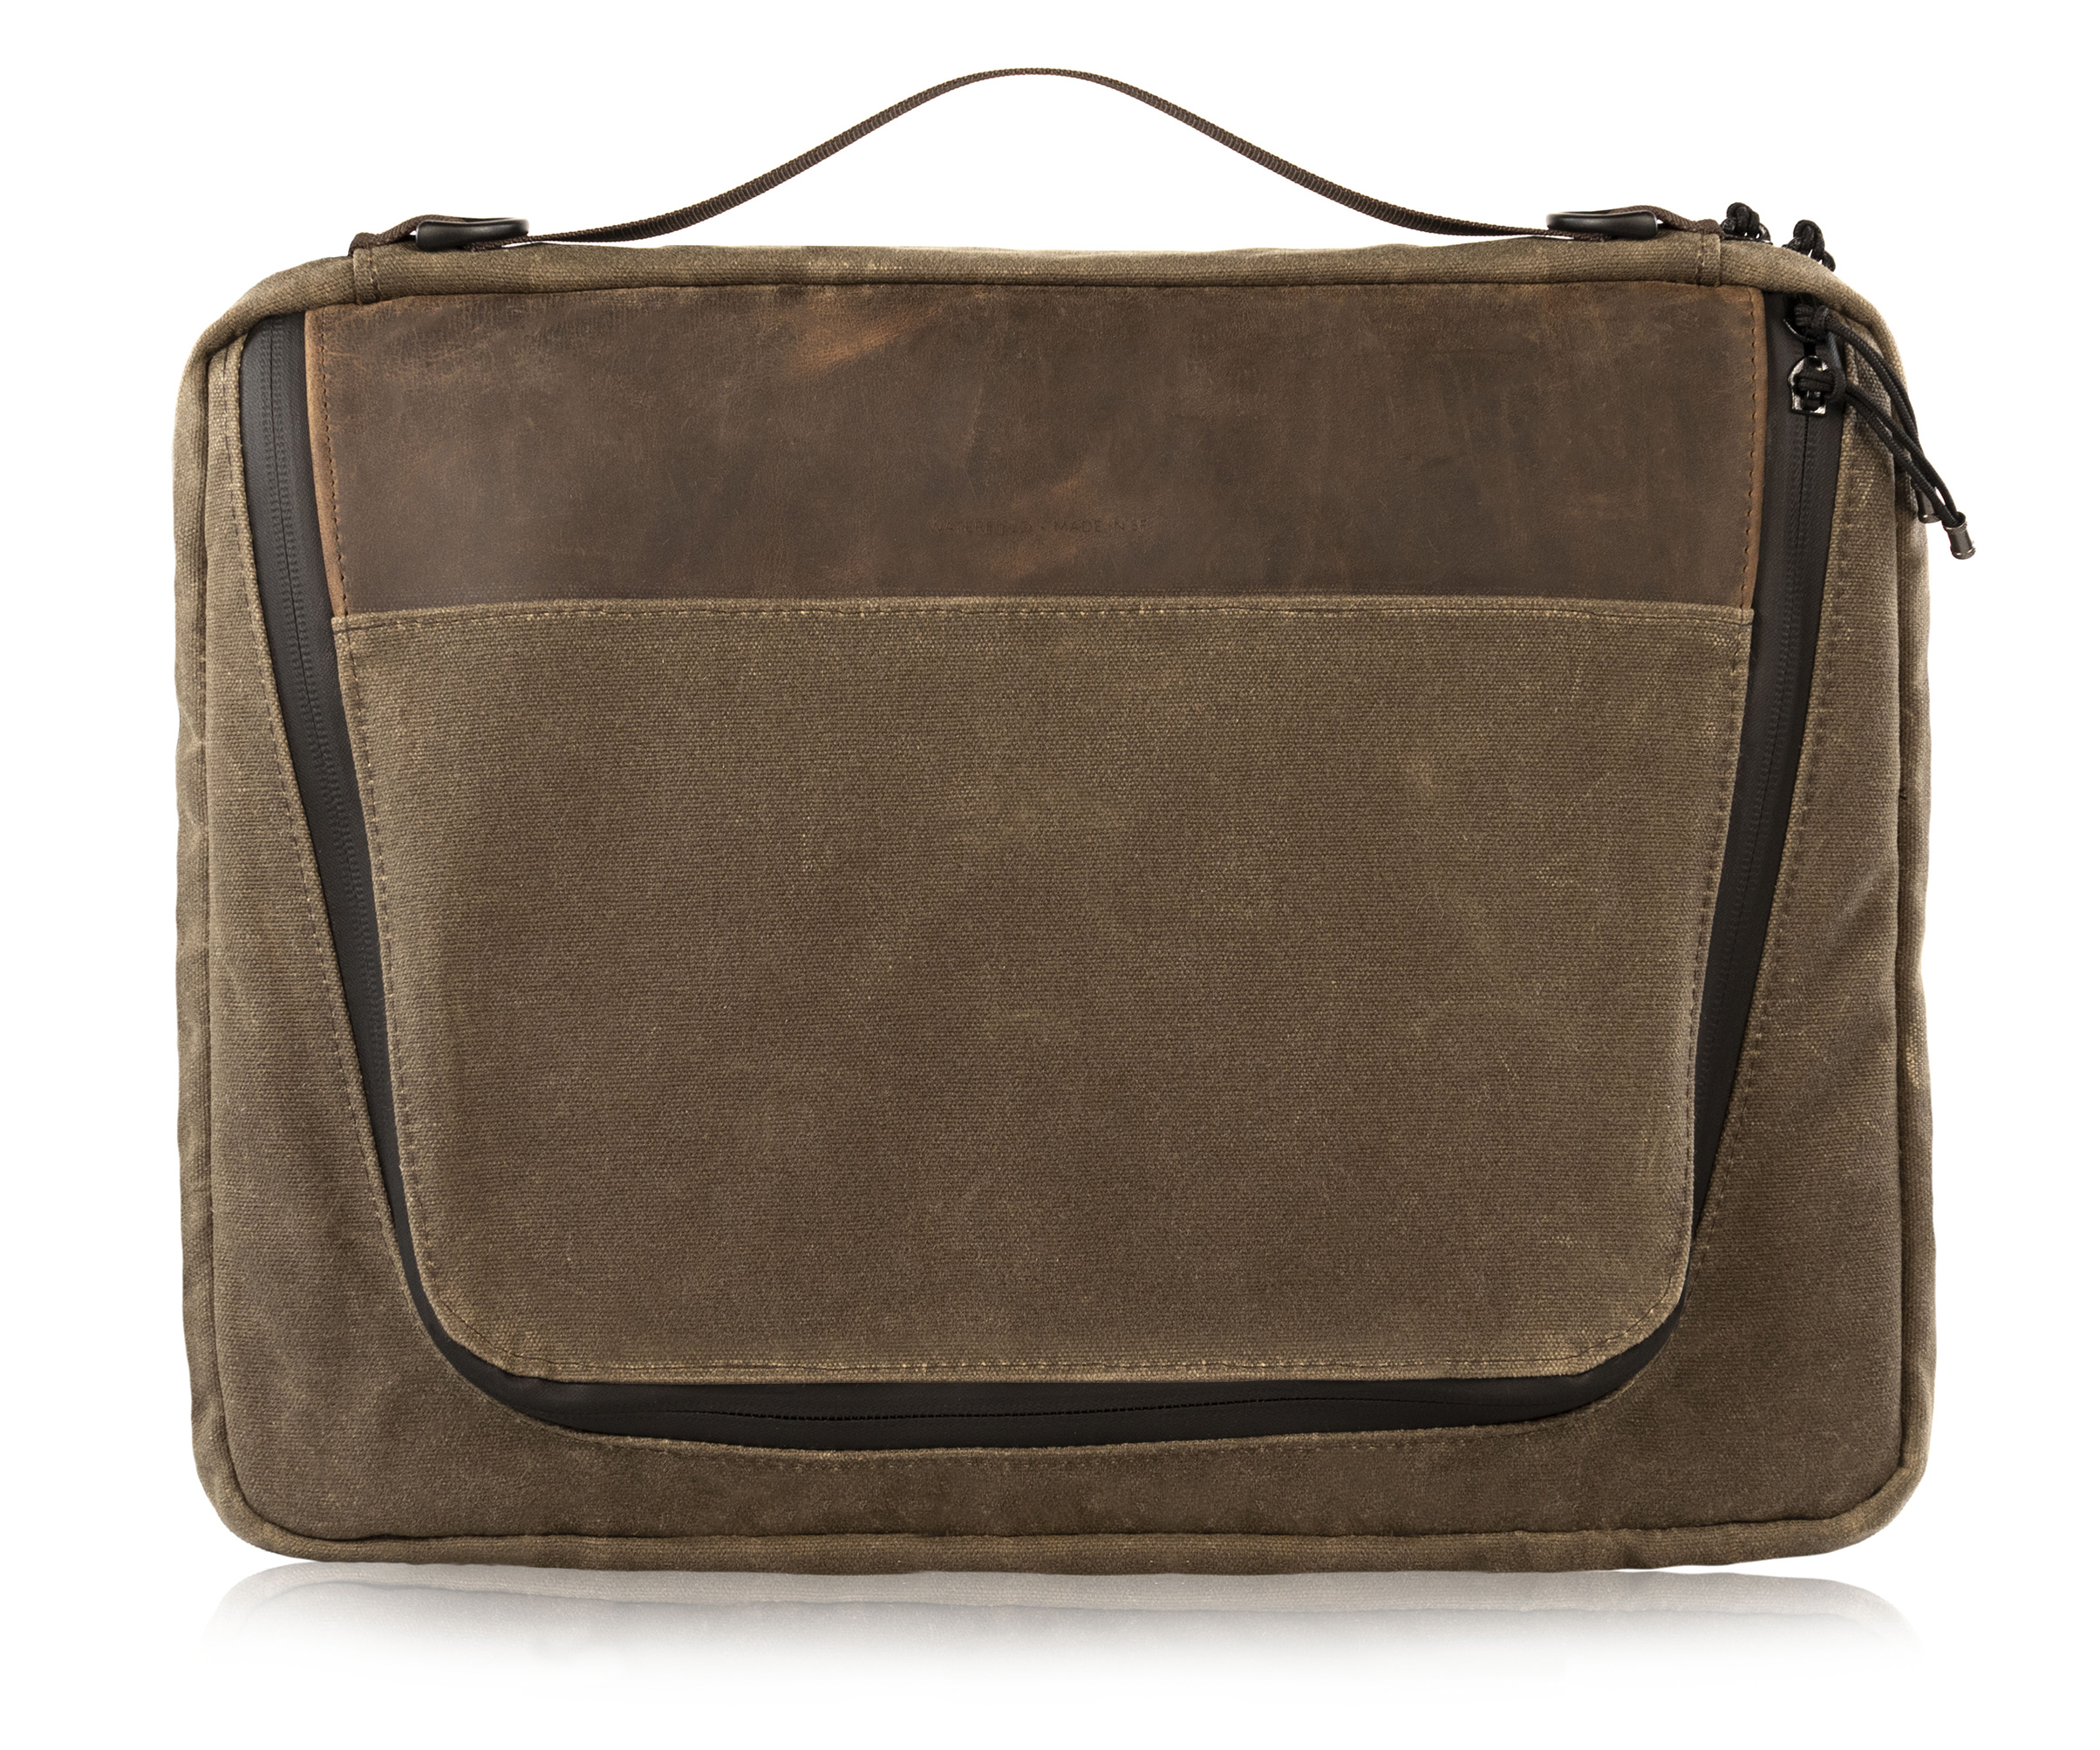 Tech Folio 16-inch in waxed canvas and chocolate leather